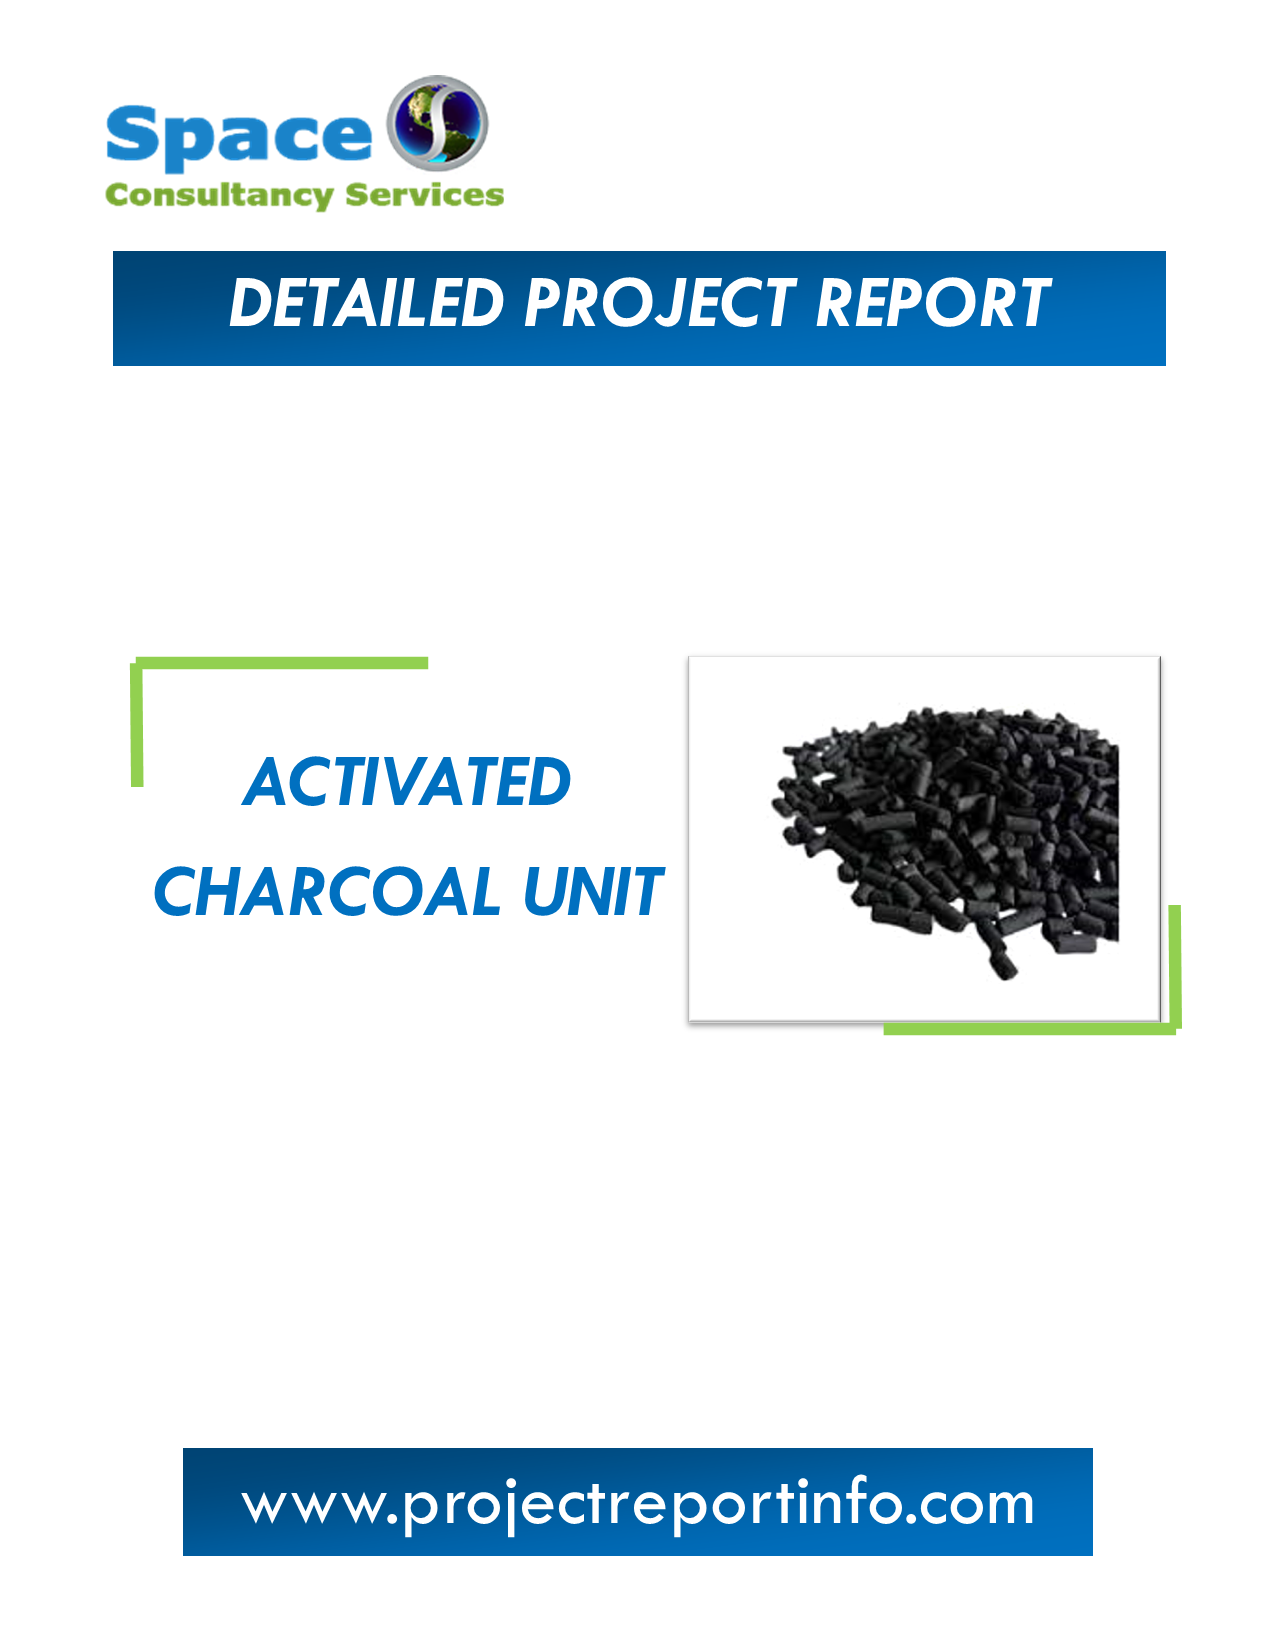 Project Report on Activated Charcoal Unit